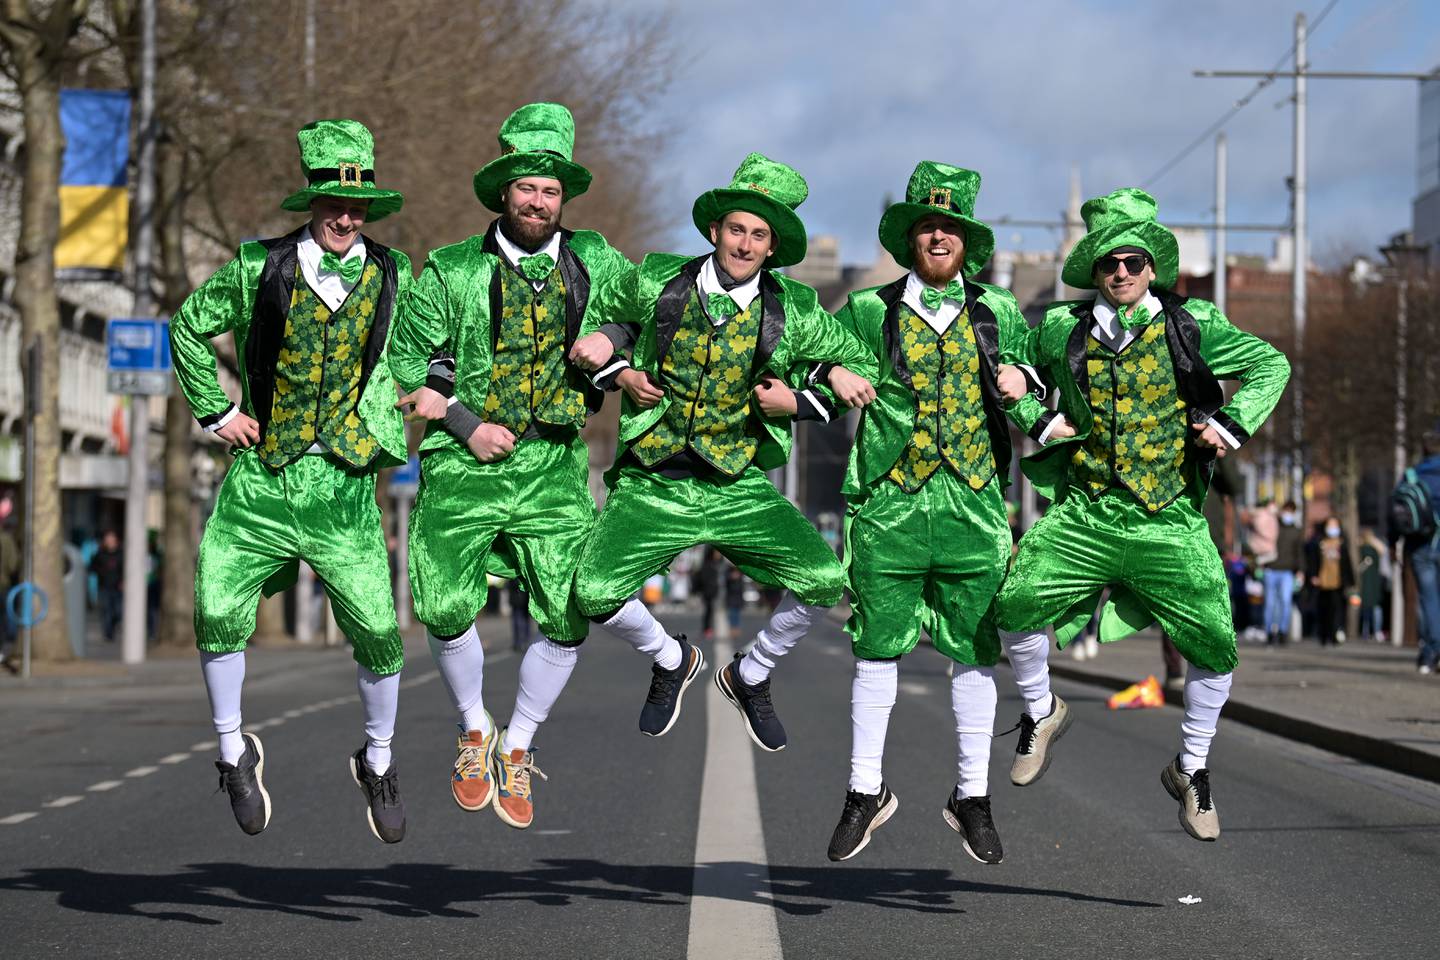 DUBLIN, IRELAND - MARCH 17: A group in fancy dress pose for a photo as Dubliners prepare to celebrate St Patrick's Day on March 17, 2022 in Dublin, Ireland. St Patrick's Day celebrations return to the streets of Dublin after a two-year absence, due to the Covid-19 pandemic.